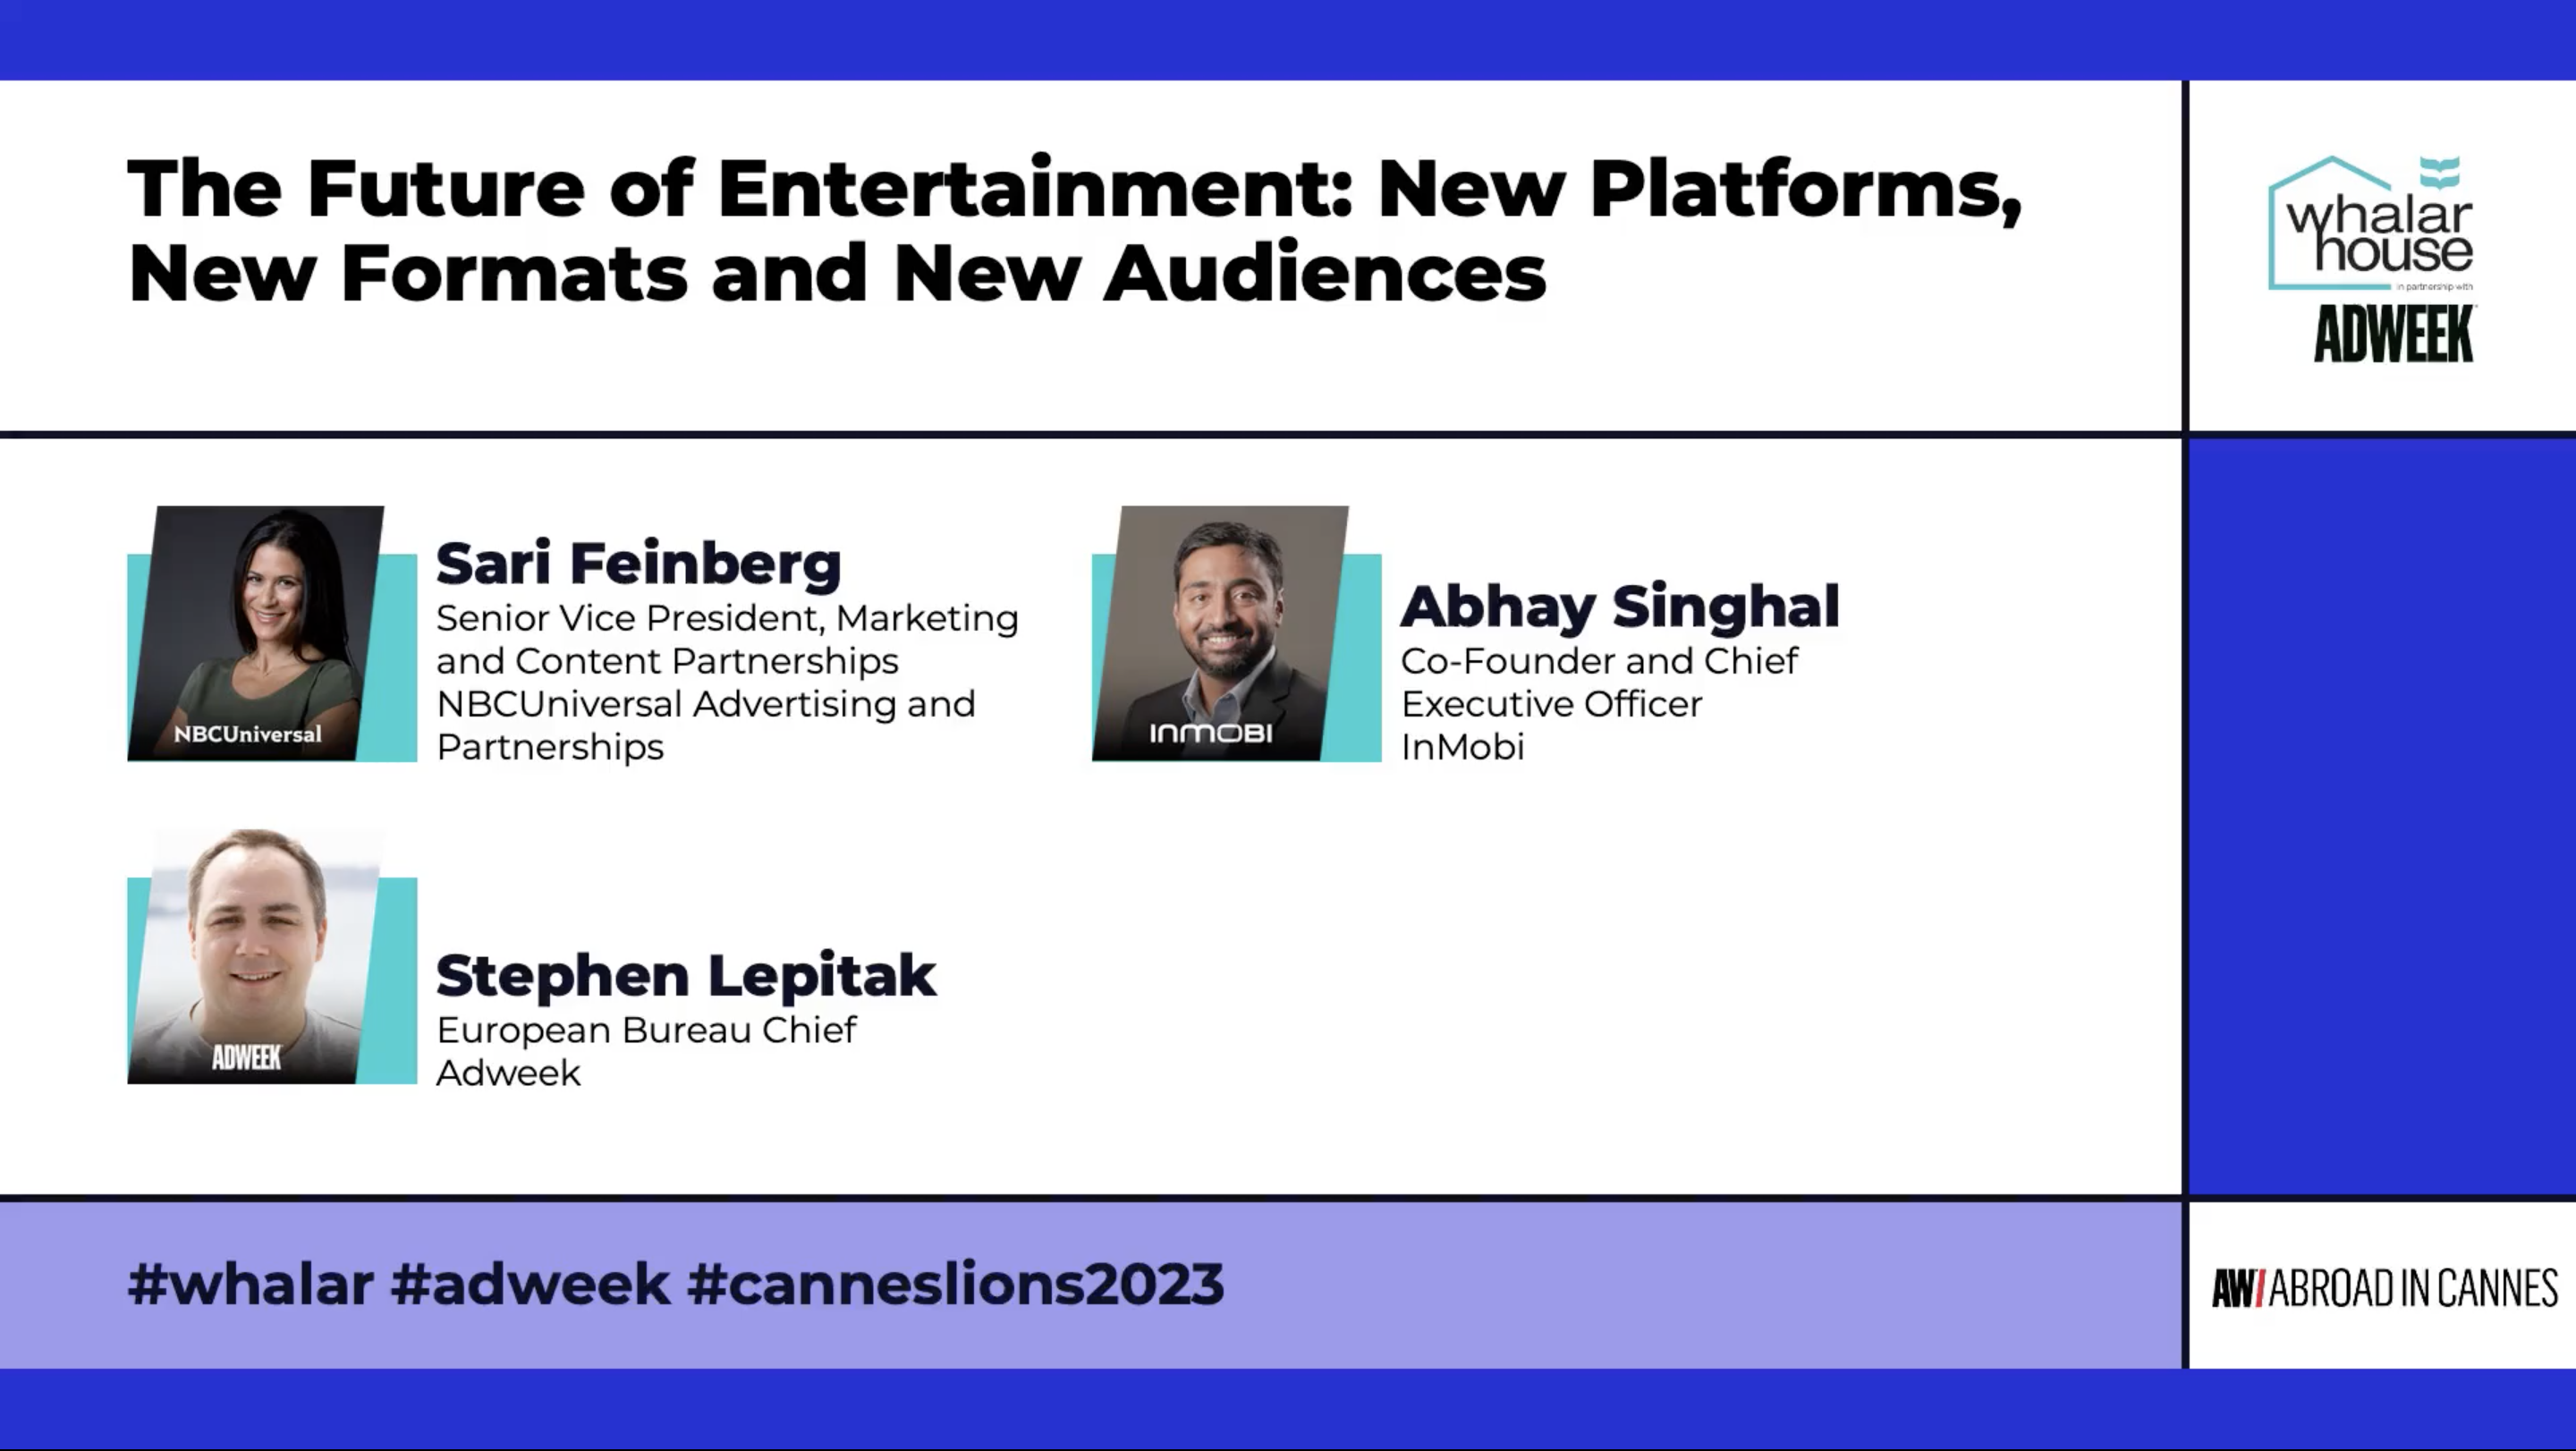 The Future of Entertainment: New Platforms, New Formats, and New Audiences at Cannes Lions 2023